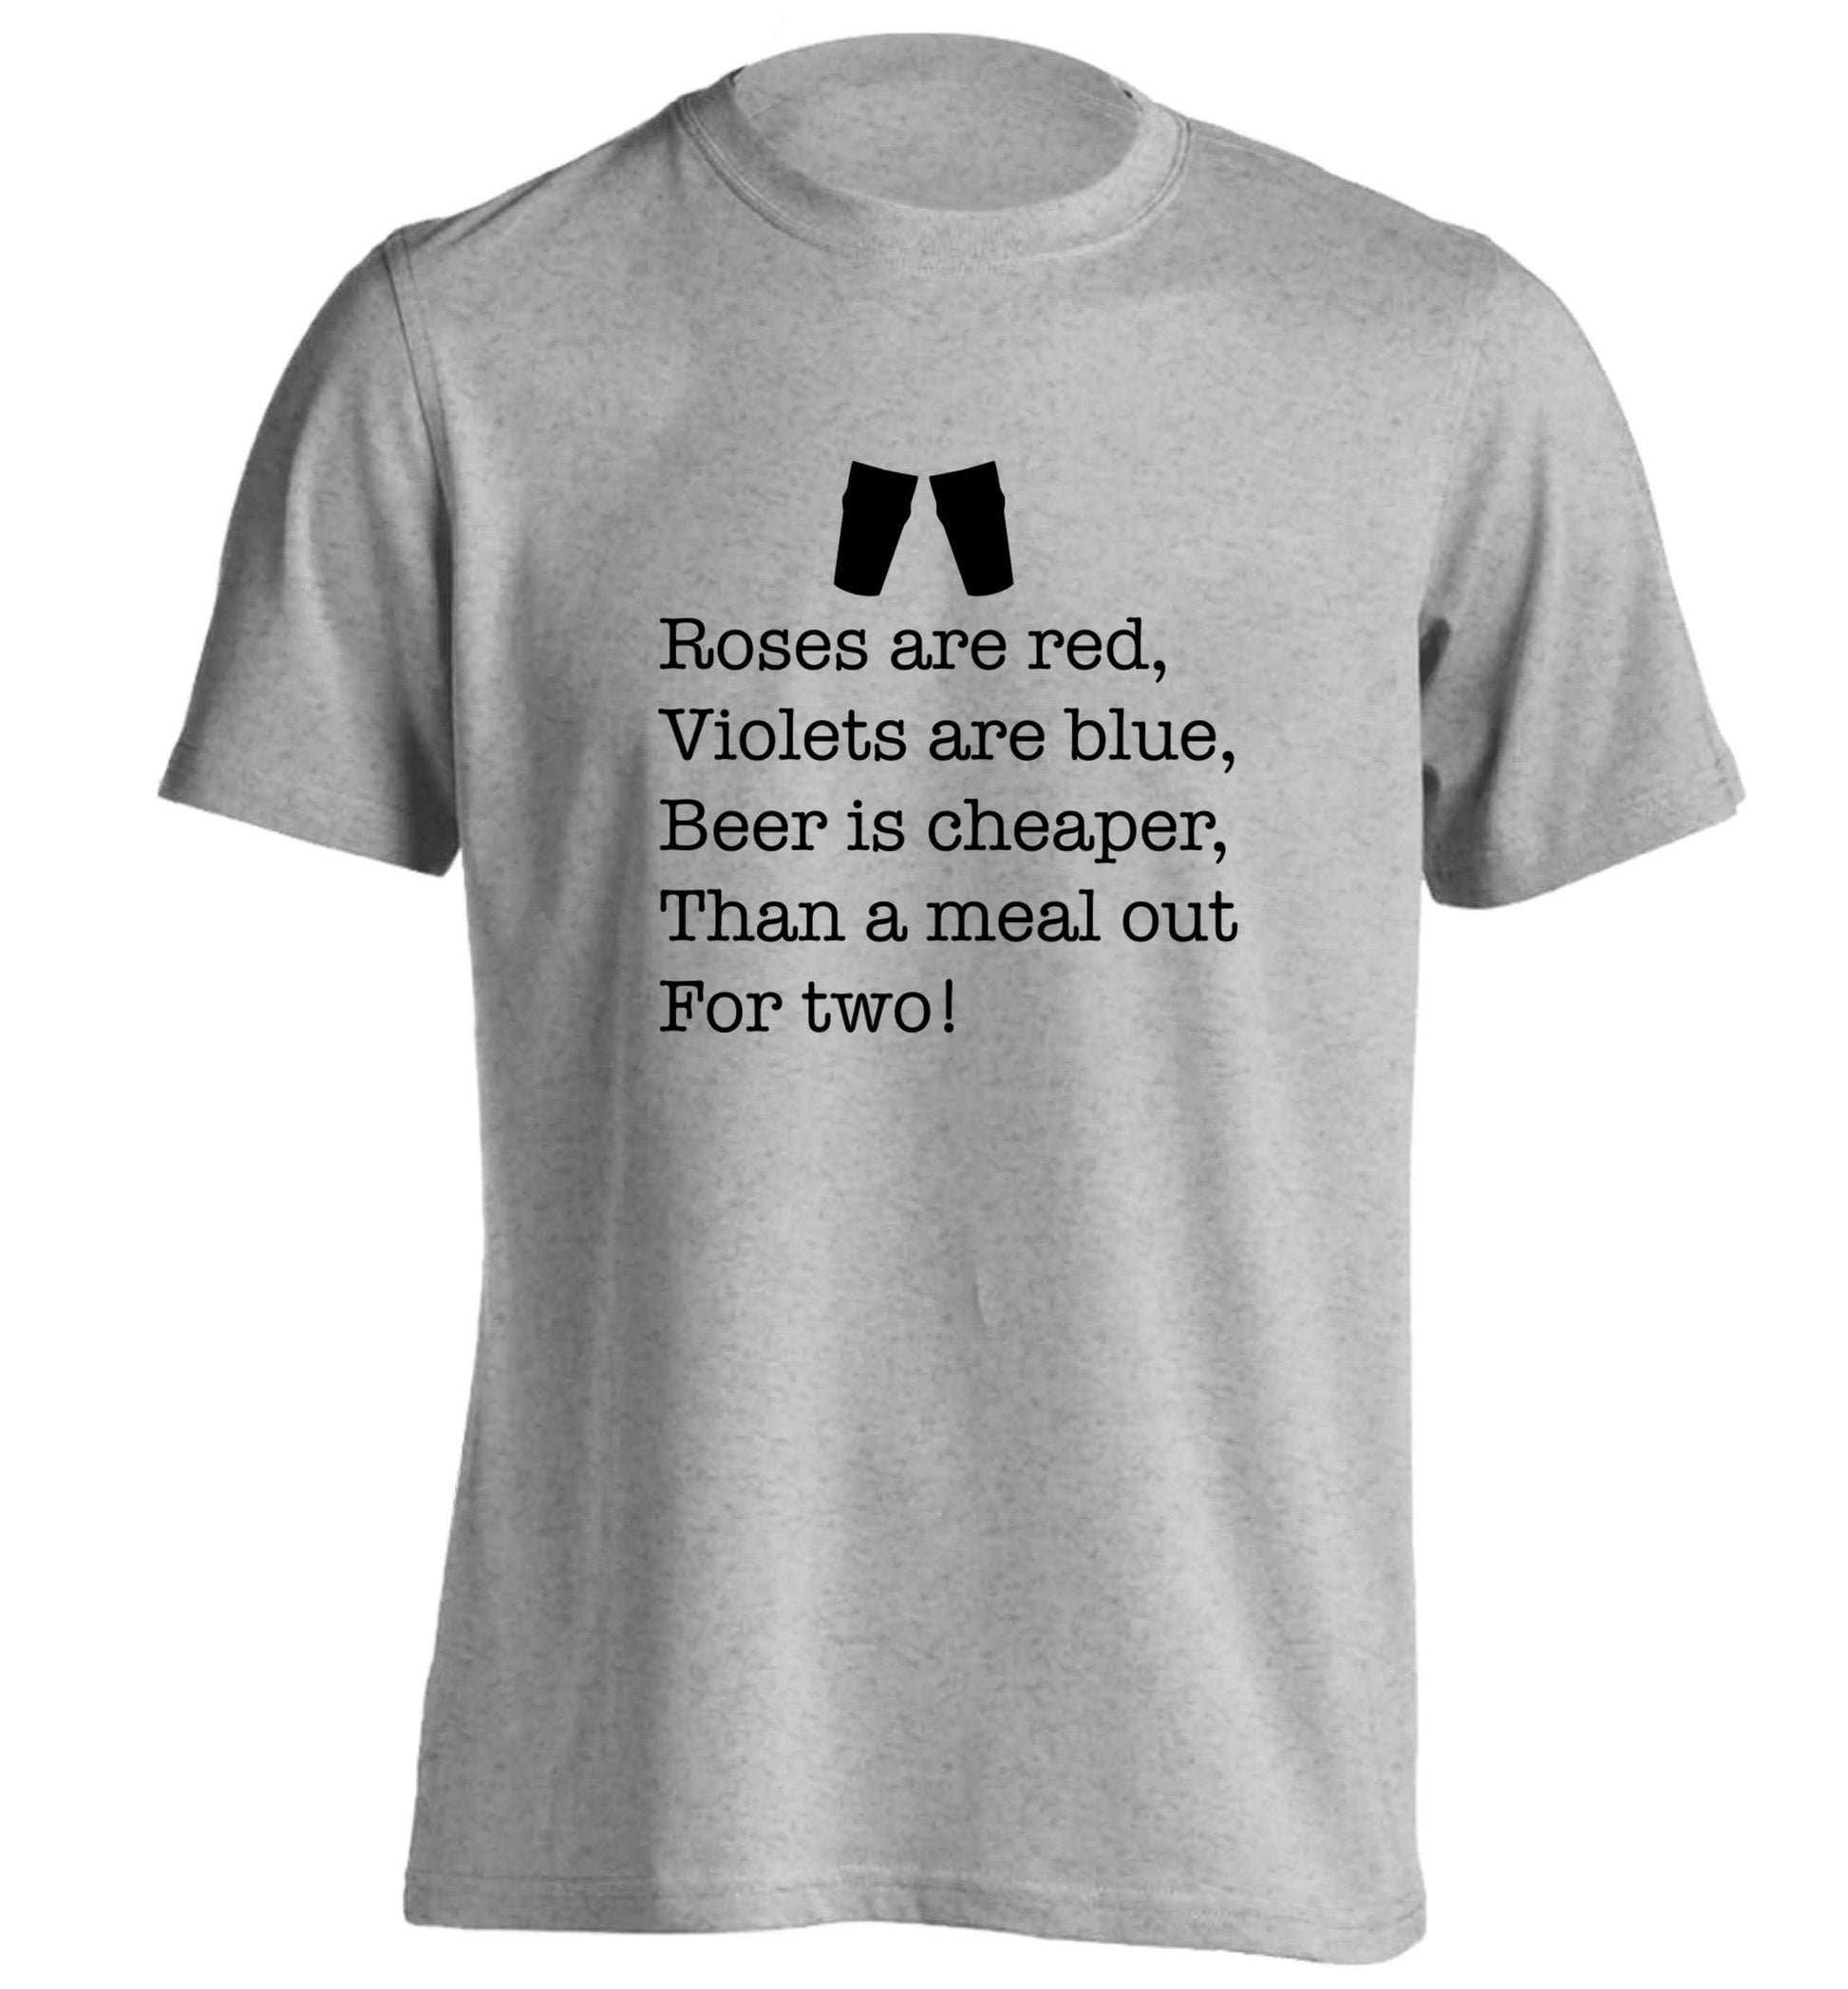 Roses are red violets are blue beer is cheaper than a meal out for two adults unisex grey Tshirt 2XL